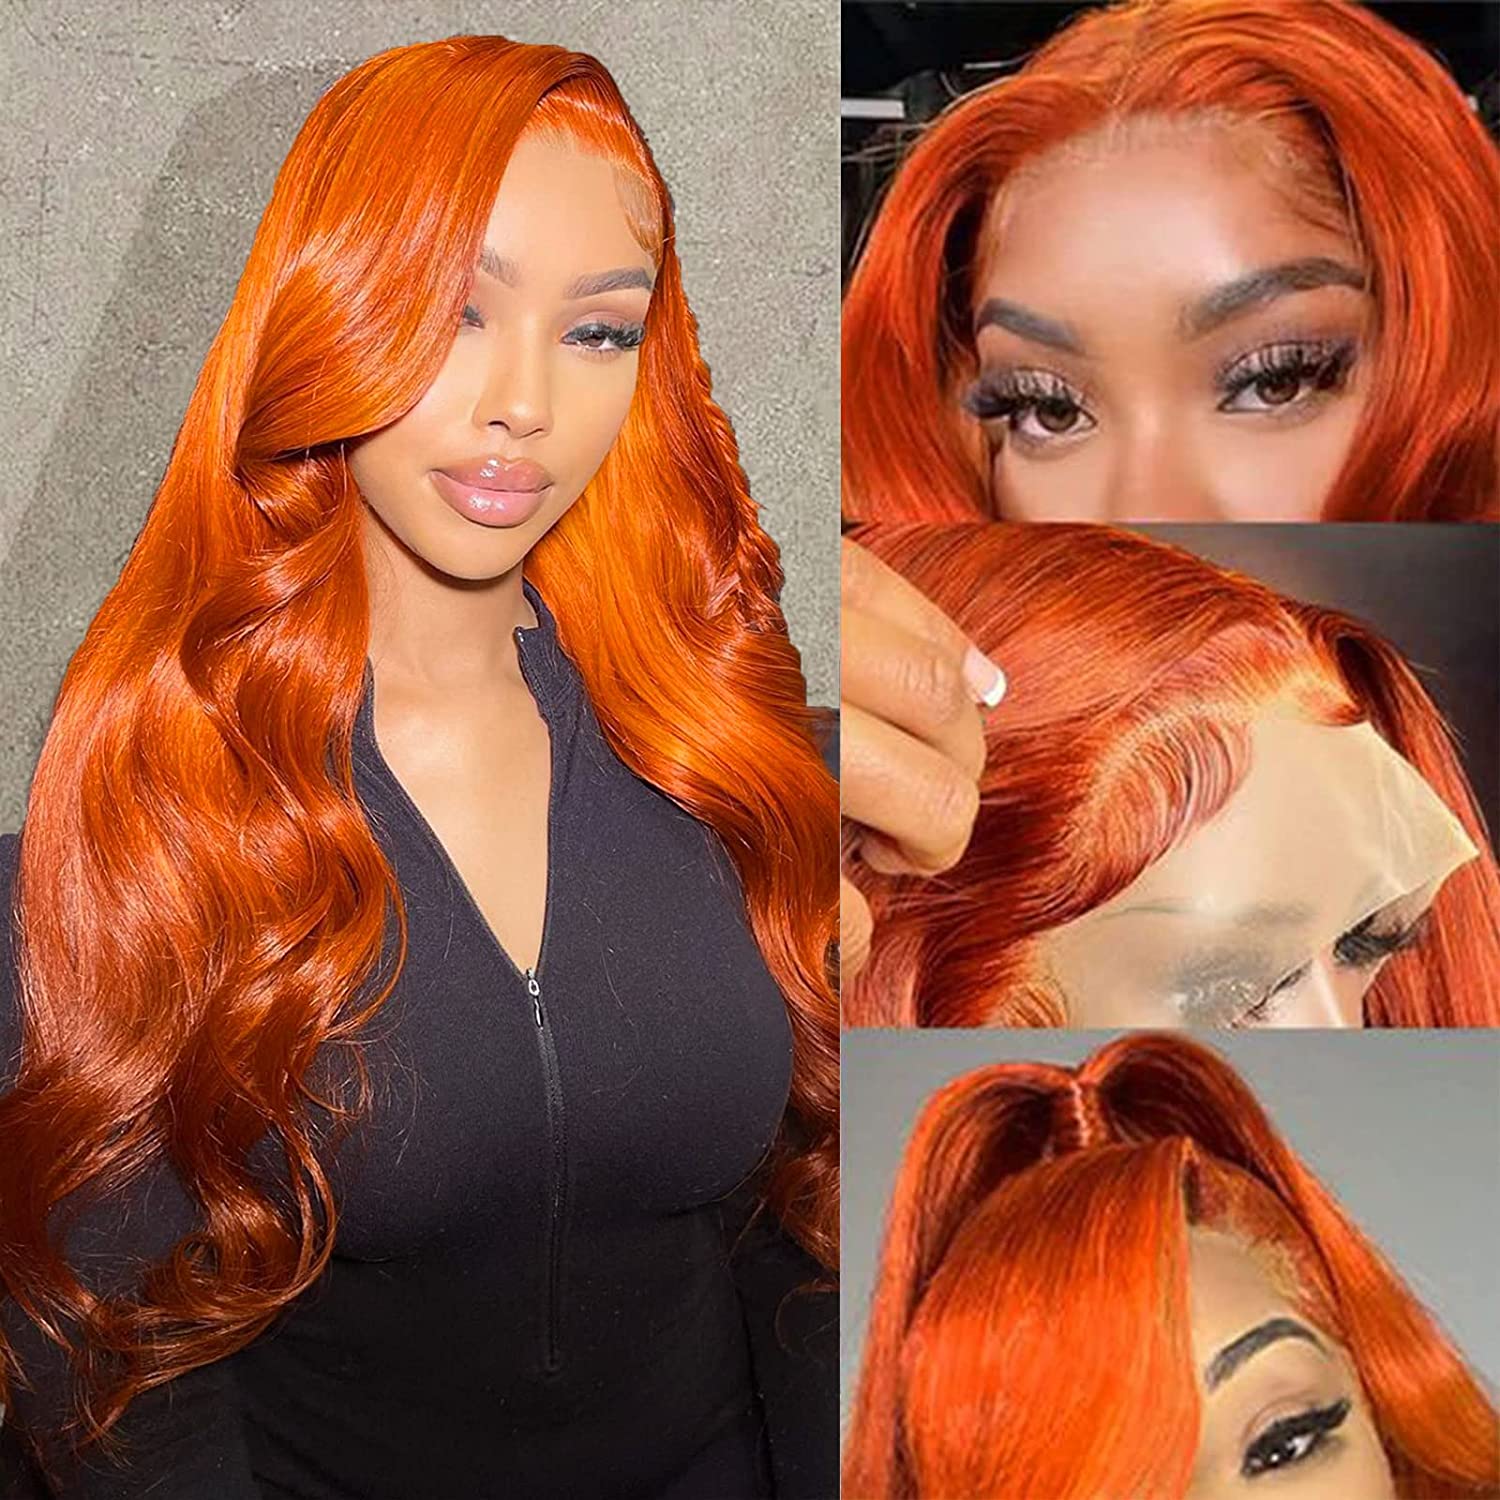 Emilyhair Highlight Ginger Orange Body Wave 13x4 Transparent Lace Front Wigs 22inch